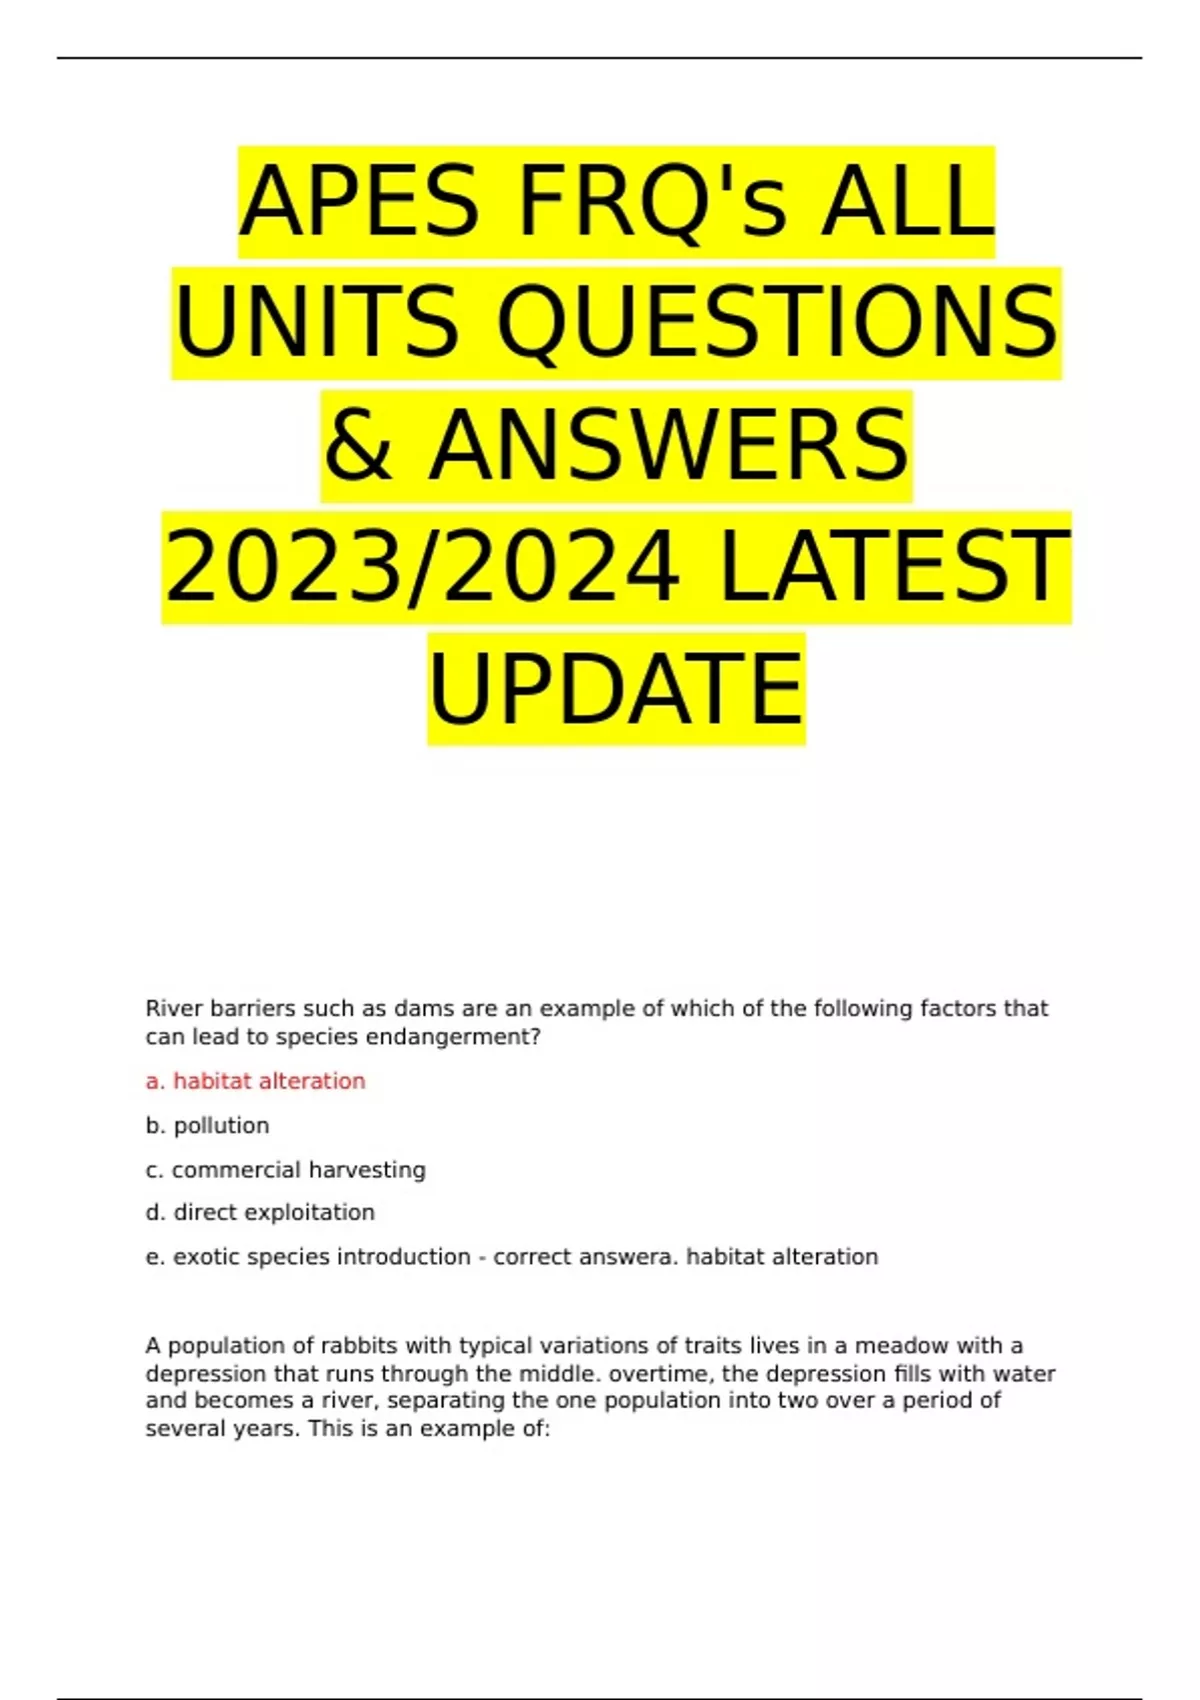 APES FRQ's ALL UNITS QUESTIONS & ANSWERS 2023/2024 LATEST UPDATE APES